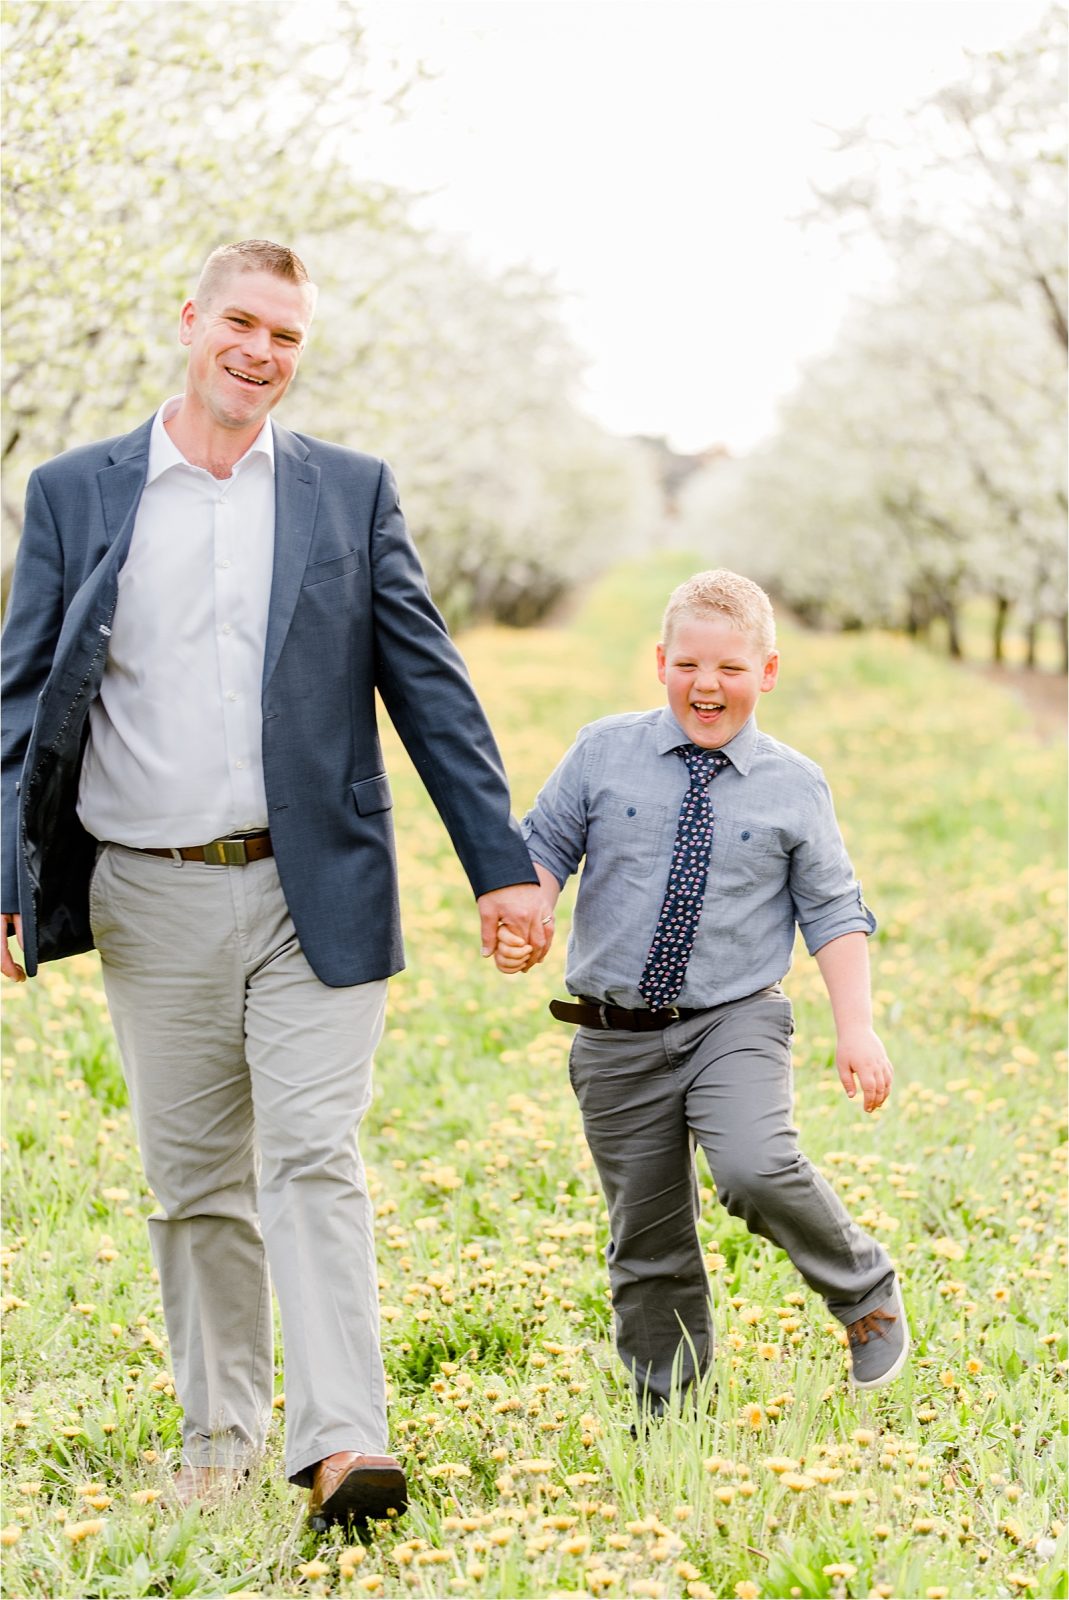 Cherry farm father son walking laughing